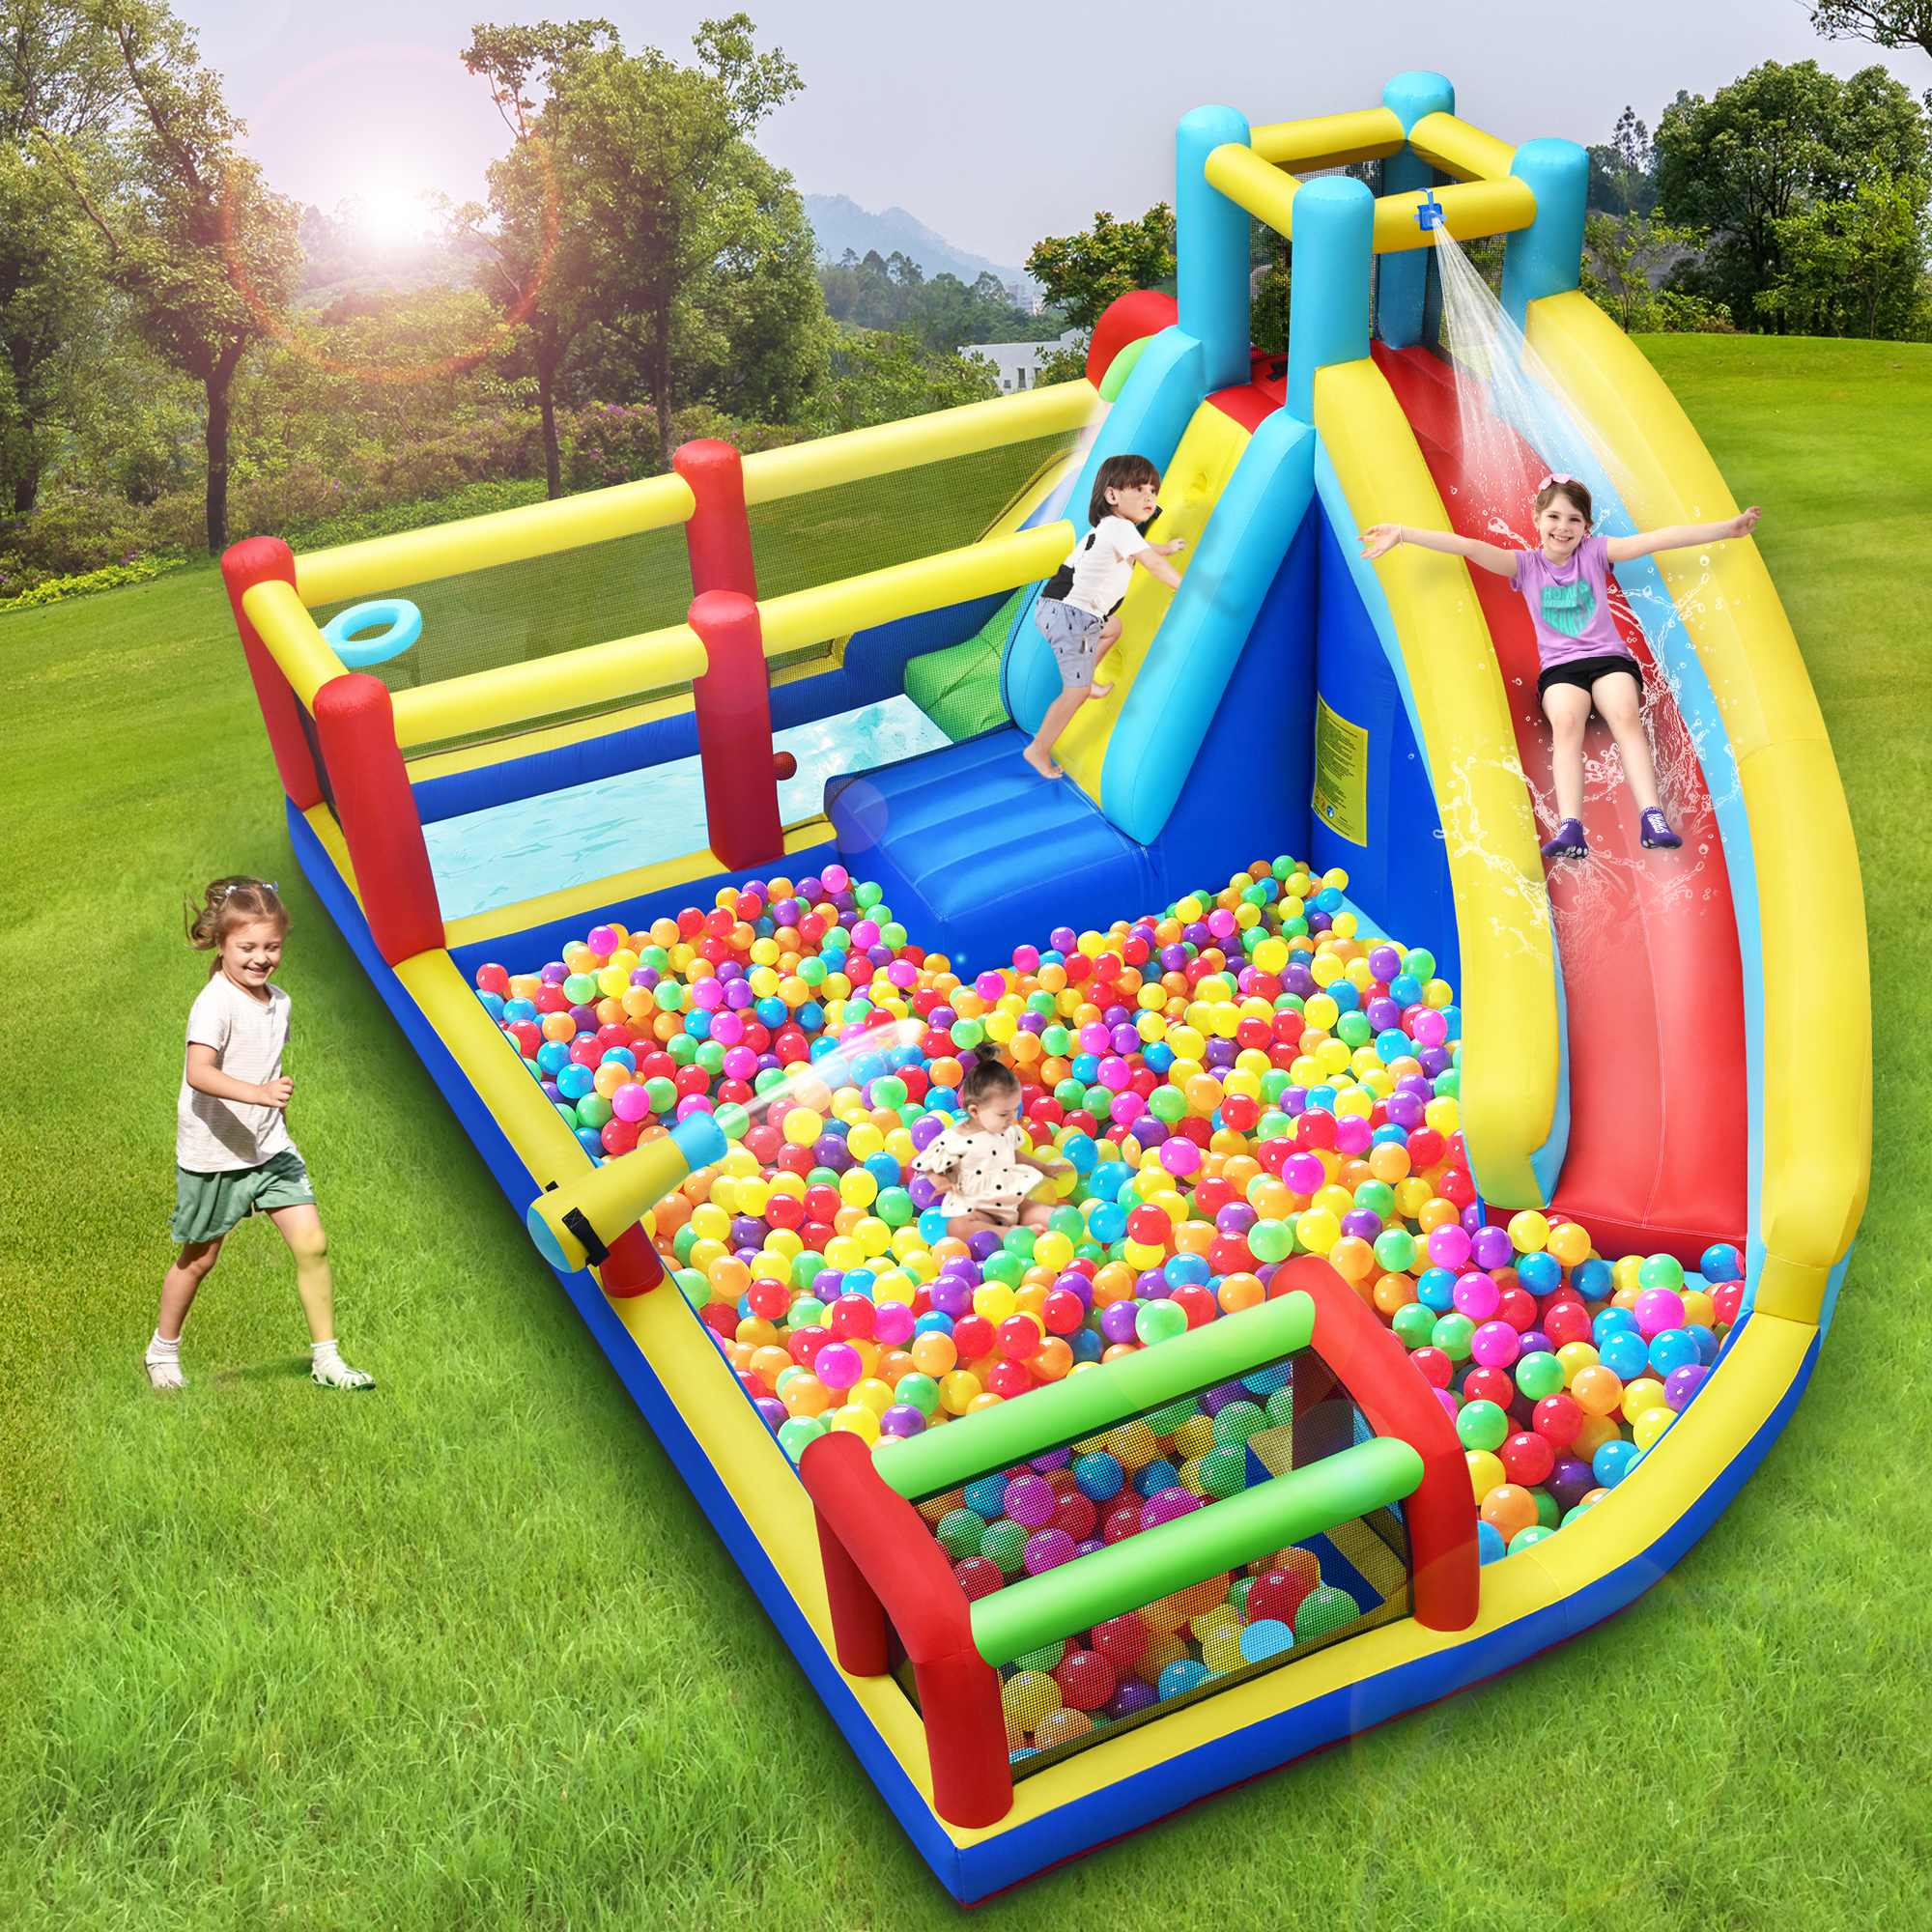 Inflatable Playground Backyard Water Park with Climbing Wall, Splash Pool, Water Cannon, Basketball Rim, Soccer Goal, Heavy Duty Blower, Water Sprinkler, for Outdoor Summer Fun-Boyel Living